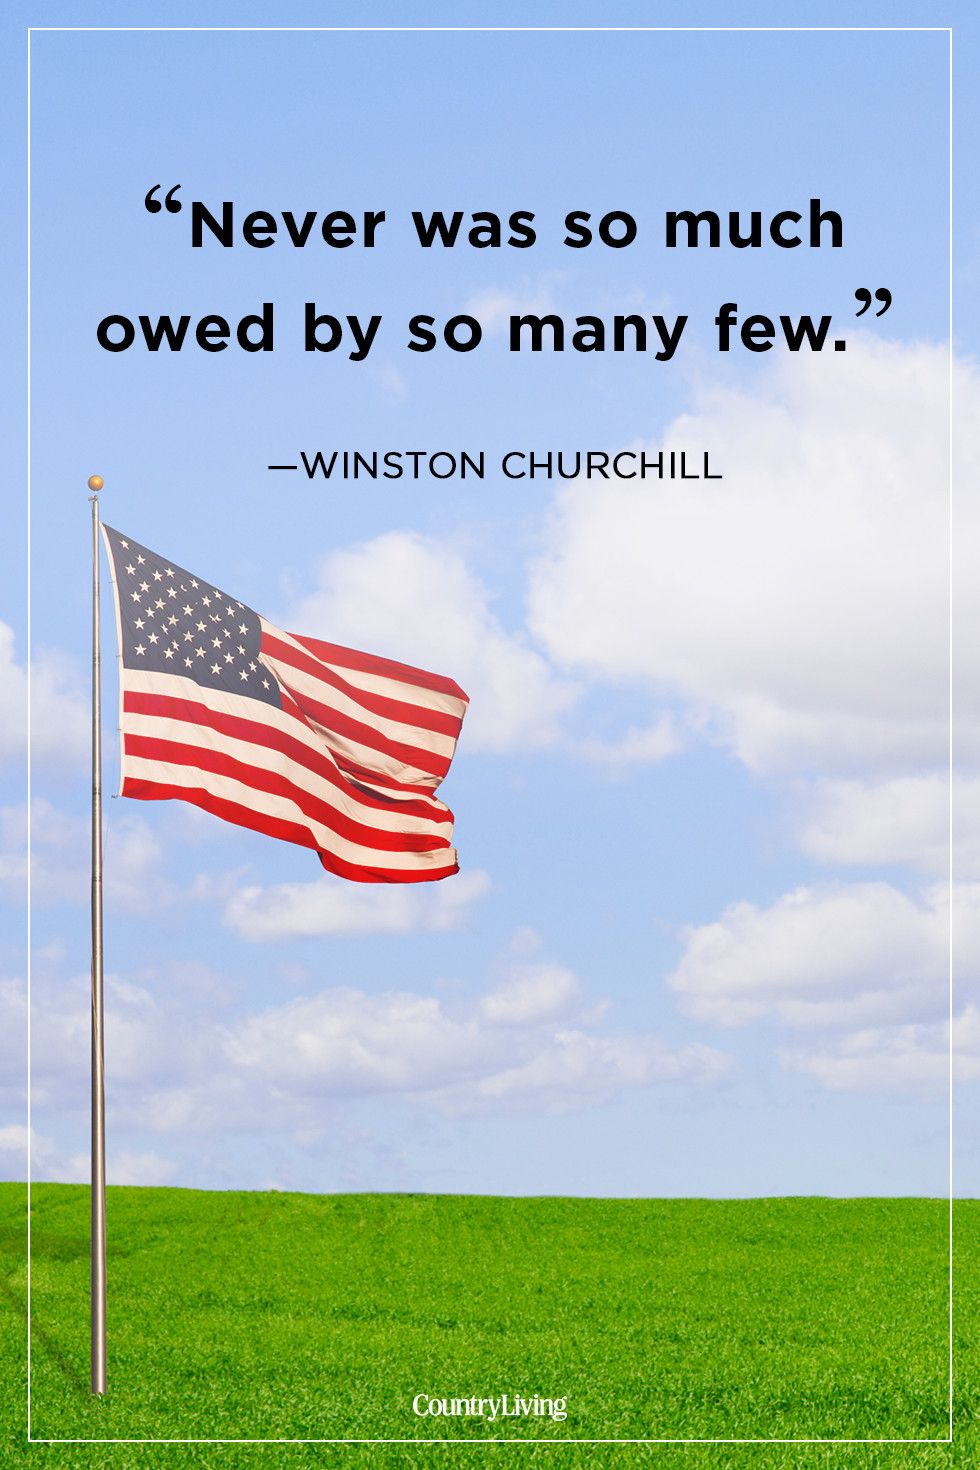 never was so much owed by so many few. winston churchill